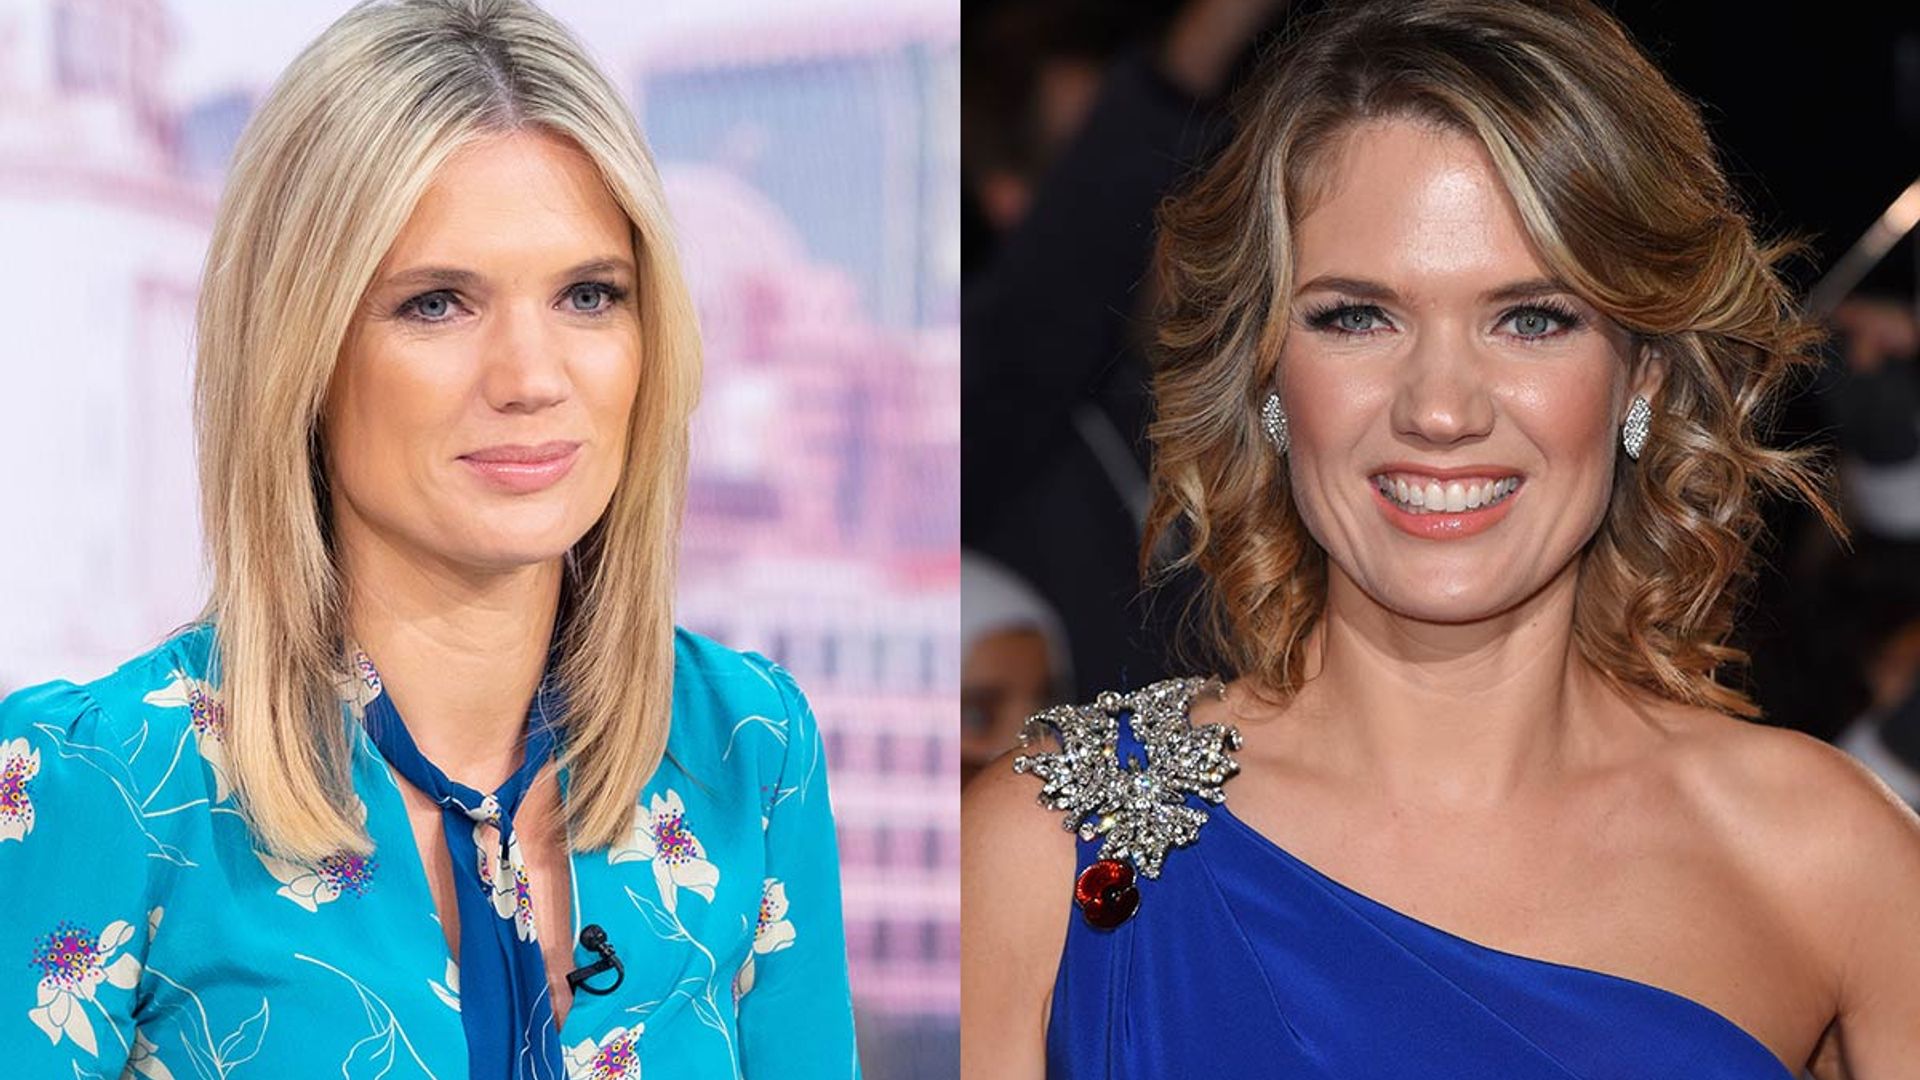 Good Morning Britain's Charlotte Hawkins wows viewers with poker straight hair